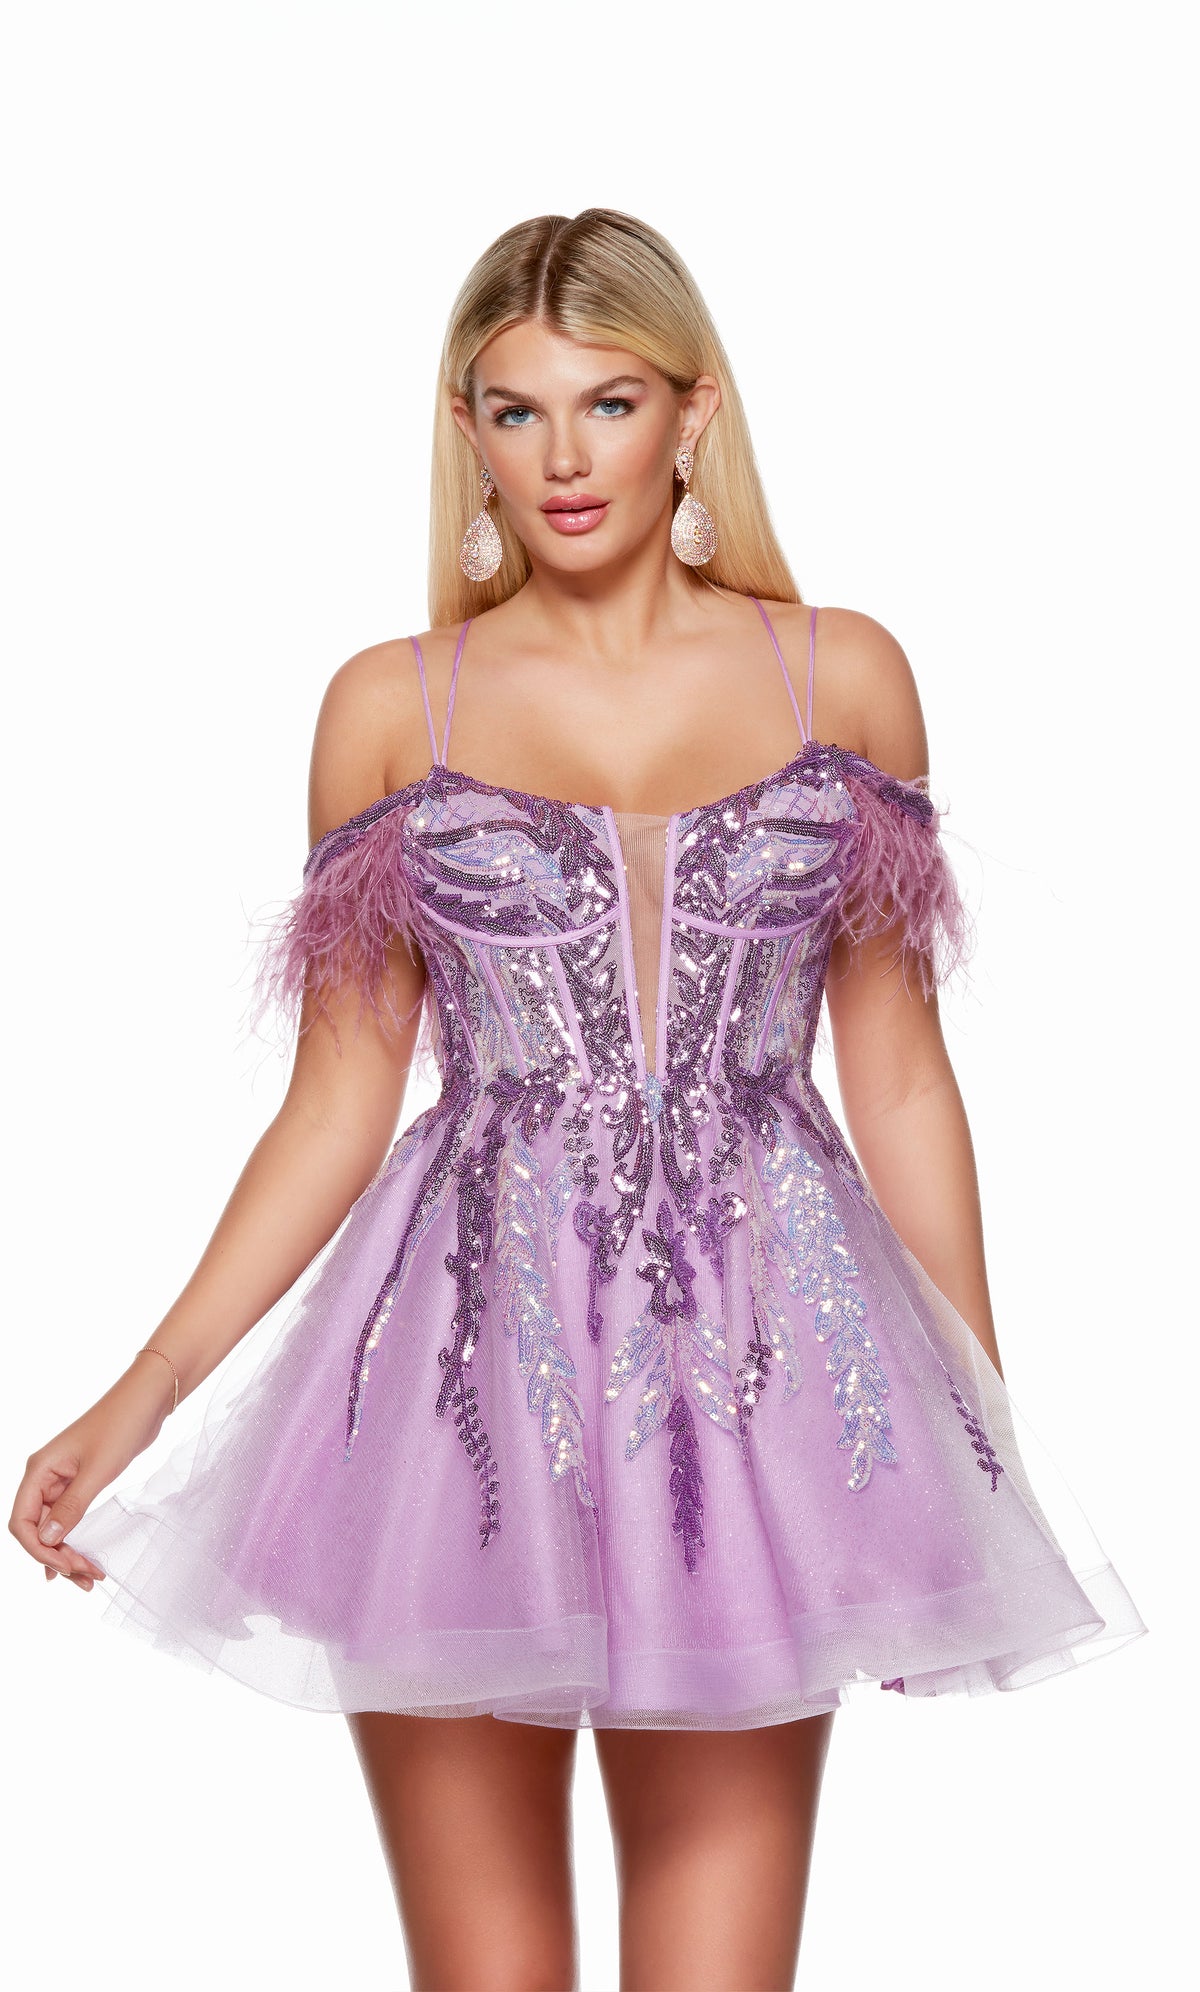 A fun and flouncy A-line dress with a plunging neckline, adorned with feather trim and multi-colored sequins for a touch of sparkle. The color is a vibrant lilac purple.